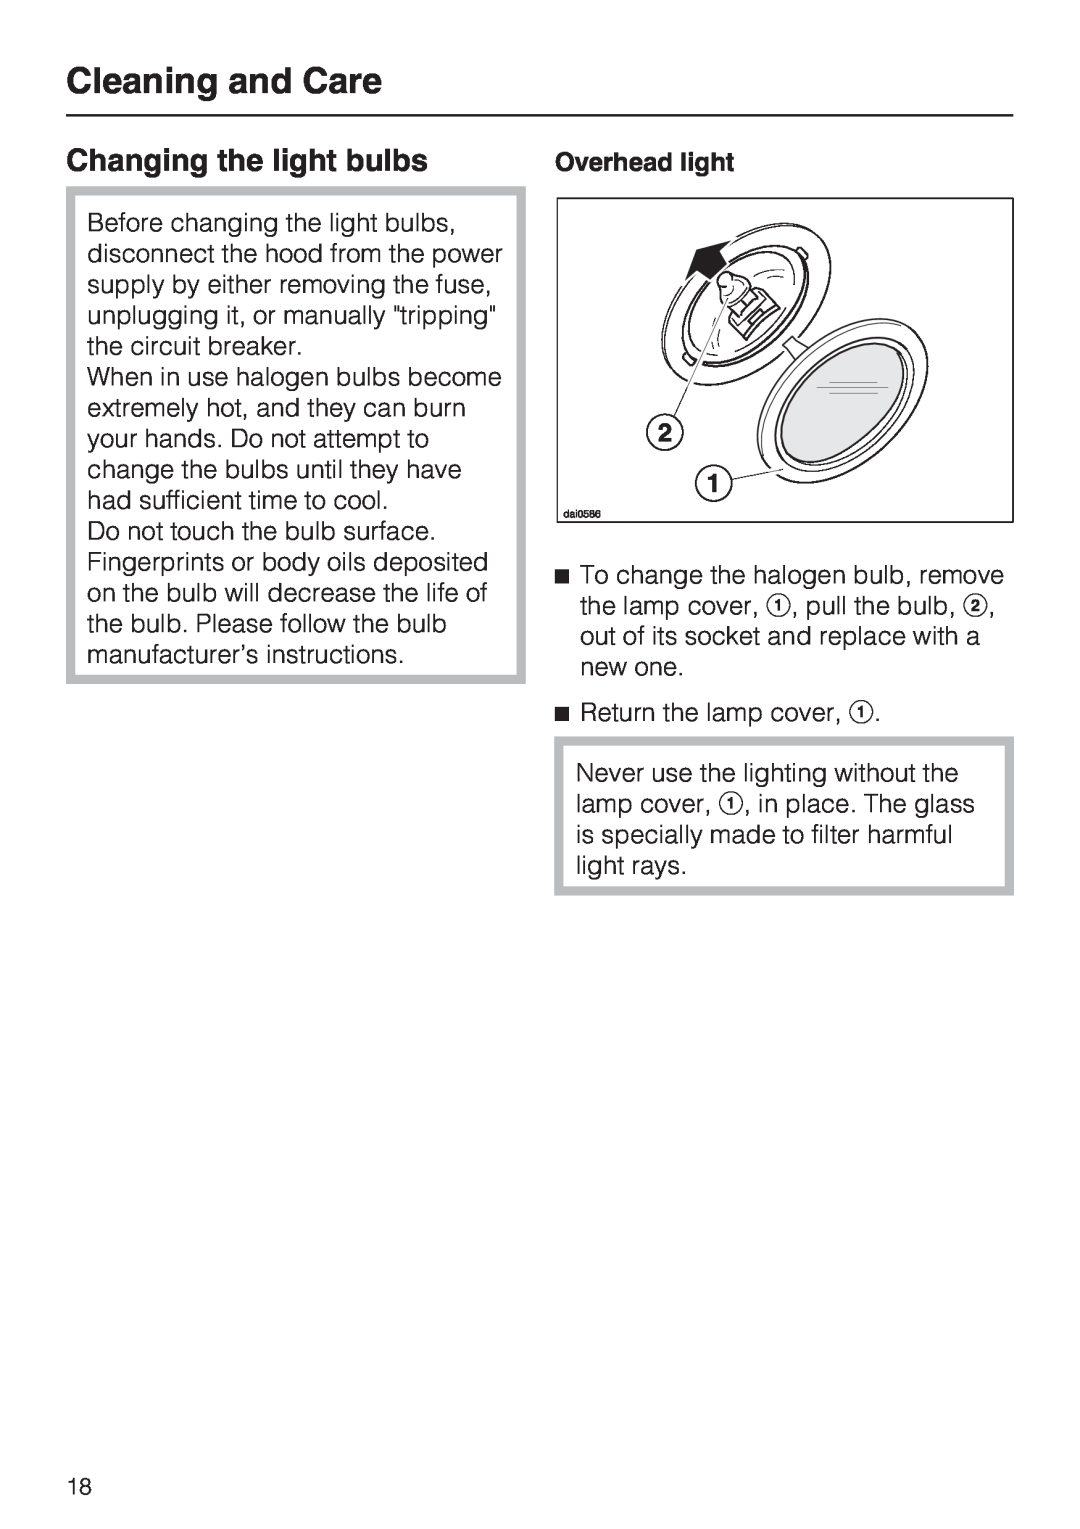 Miele DA251-4, DA259-4, DA252-4 installation instructions Cleaning and Care, Changing the light bulbs 